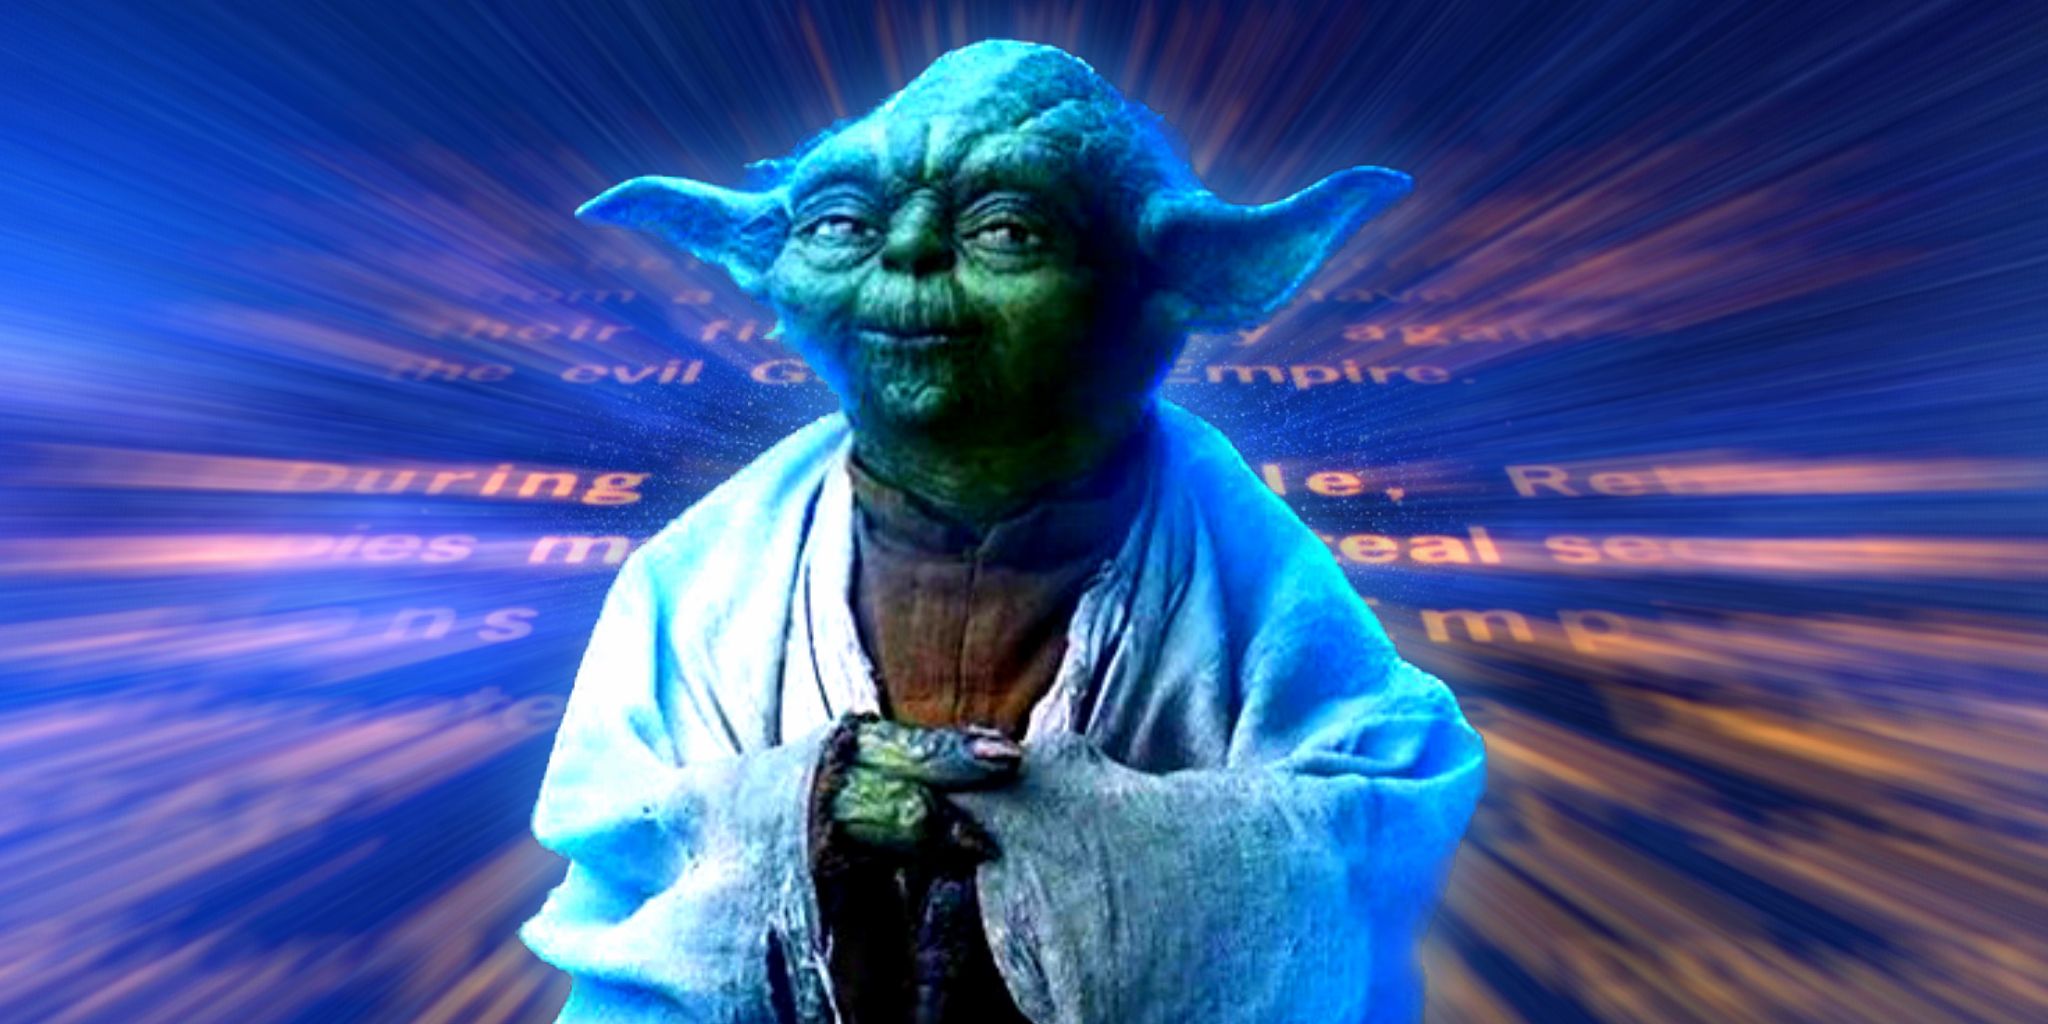 “Size Matters Not”: New Star Wars Theory Reveals Yoda’s Most Famous Saying Is A Lie